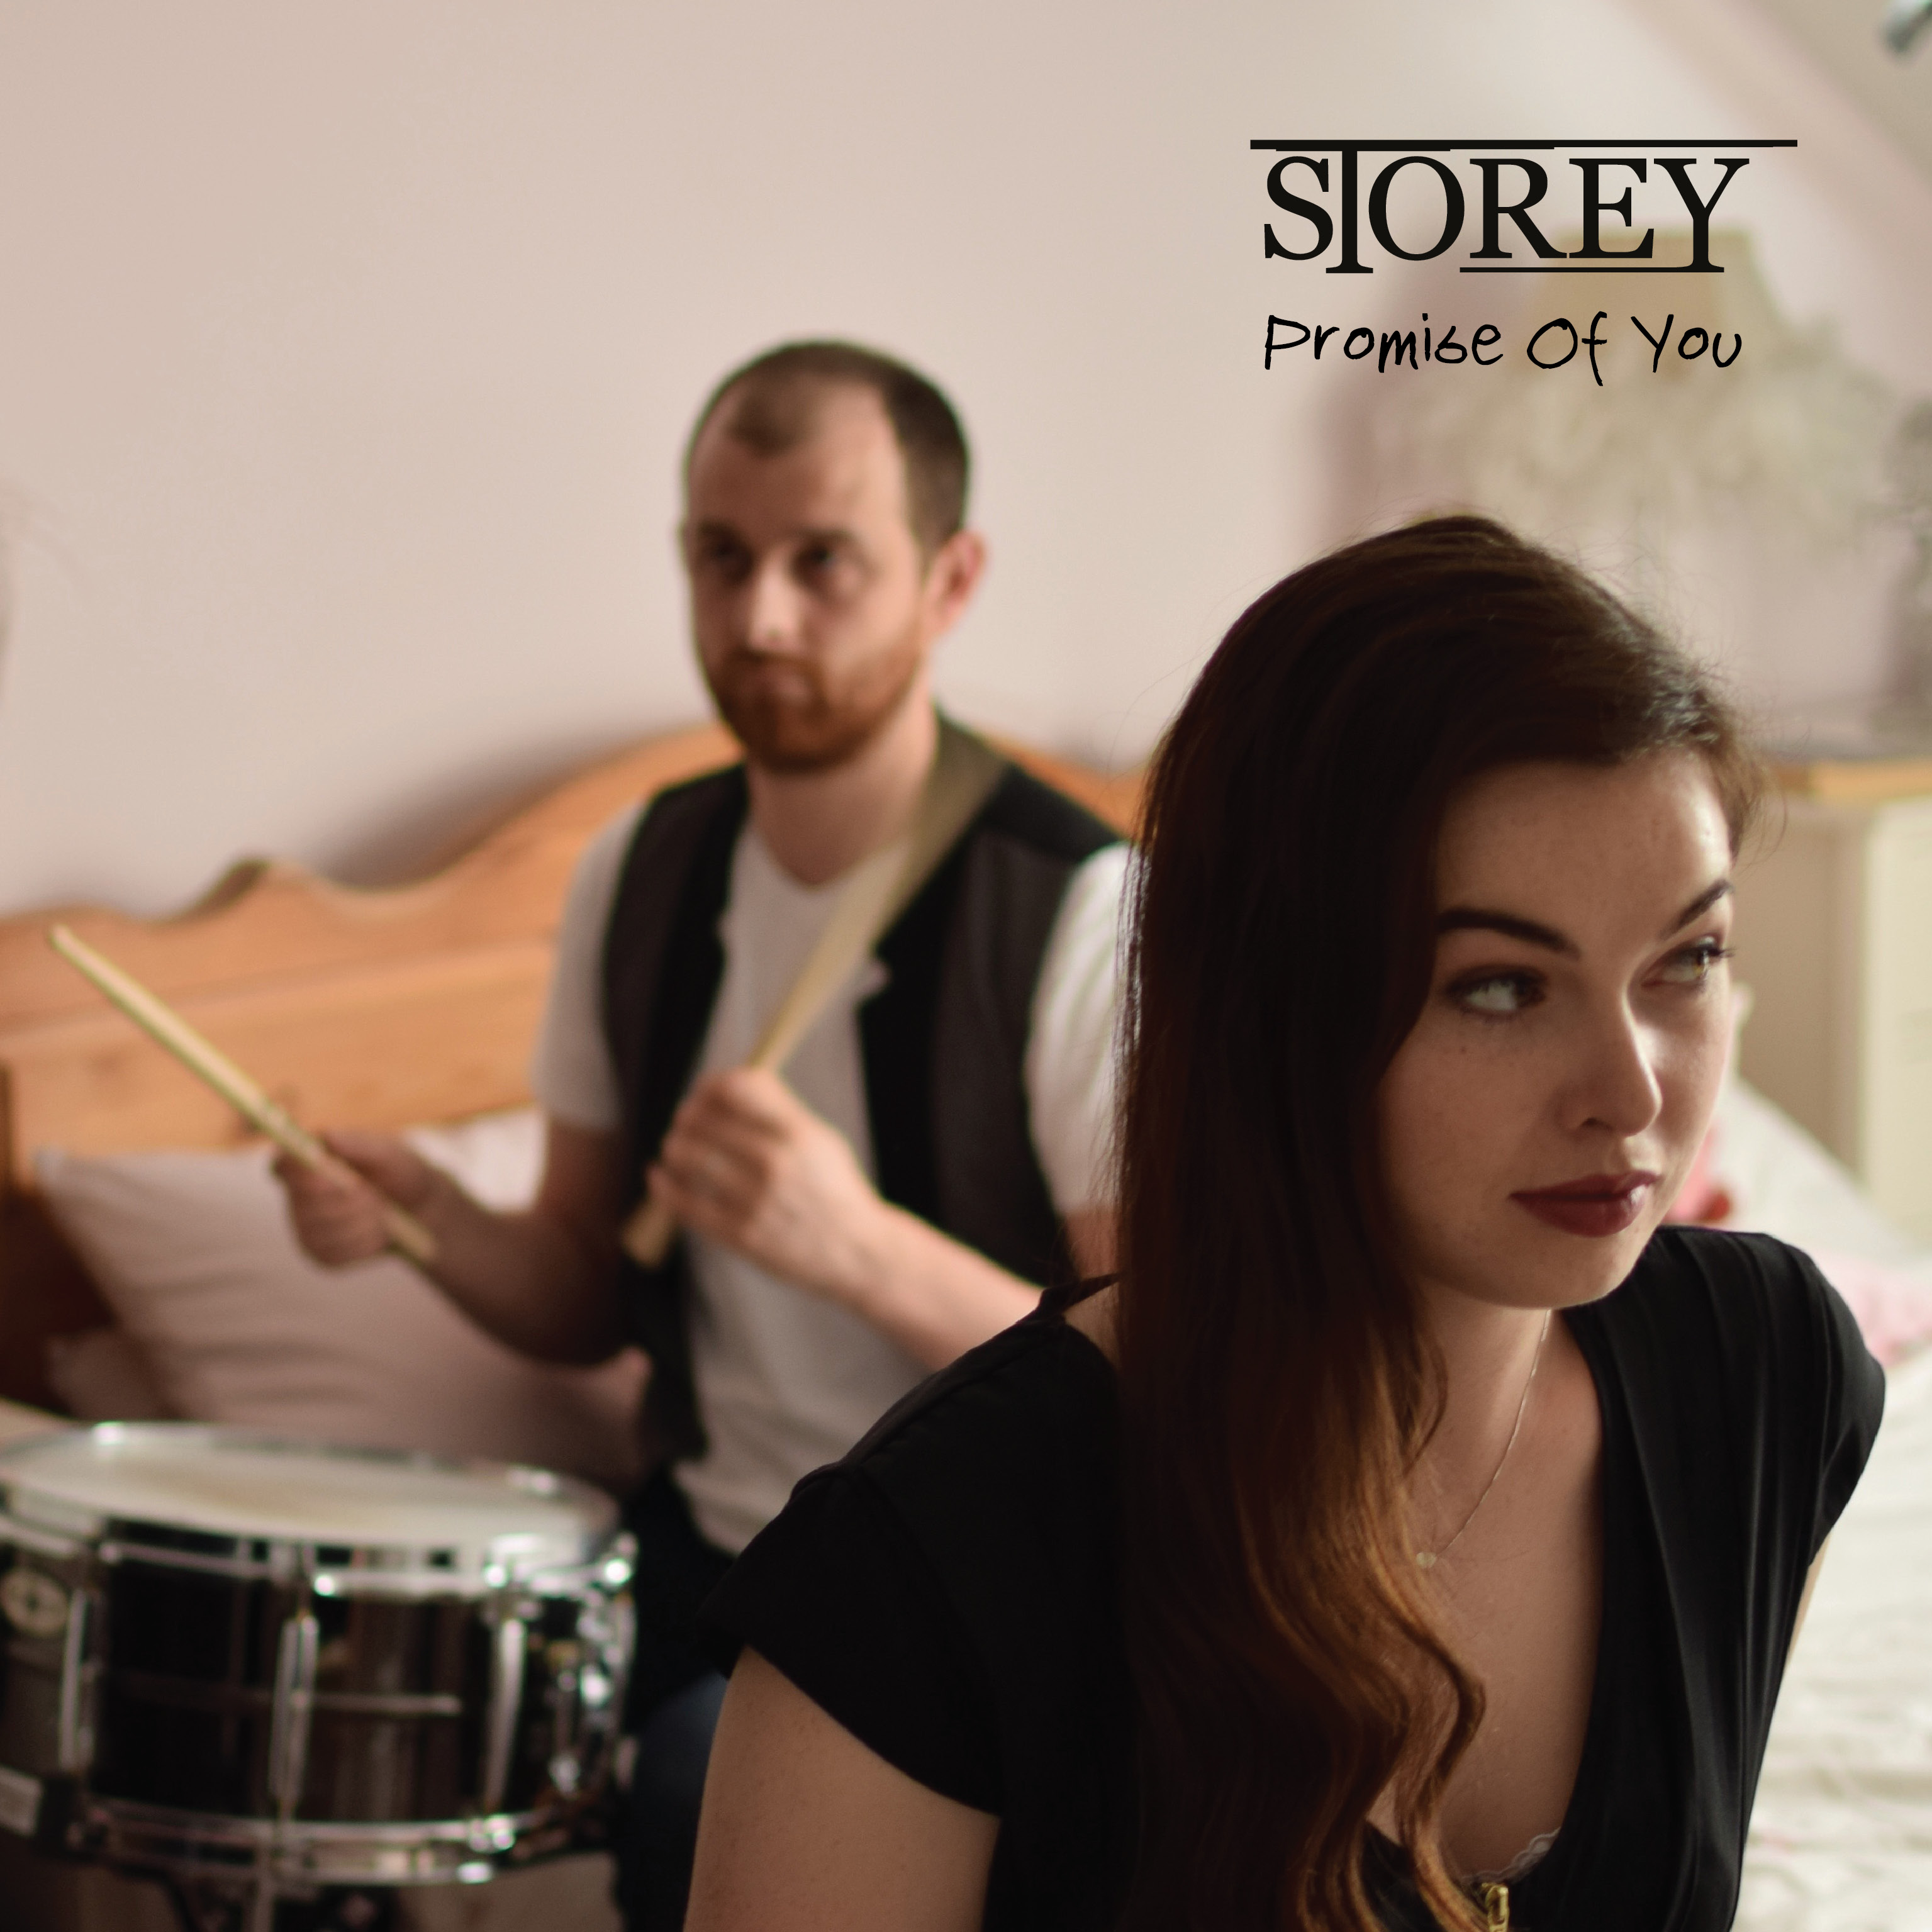 Storey - Promise of You. Produced by Arron Storey